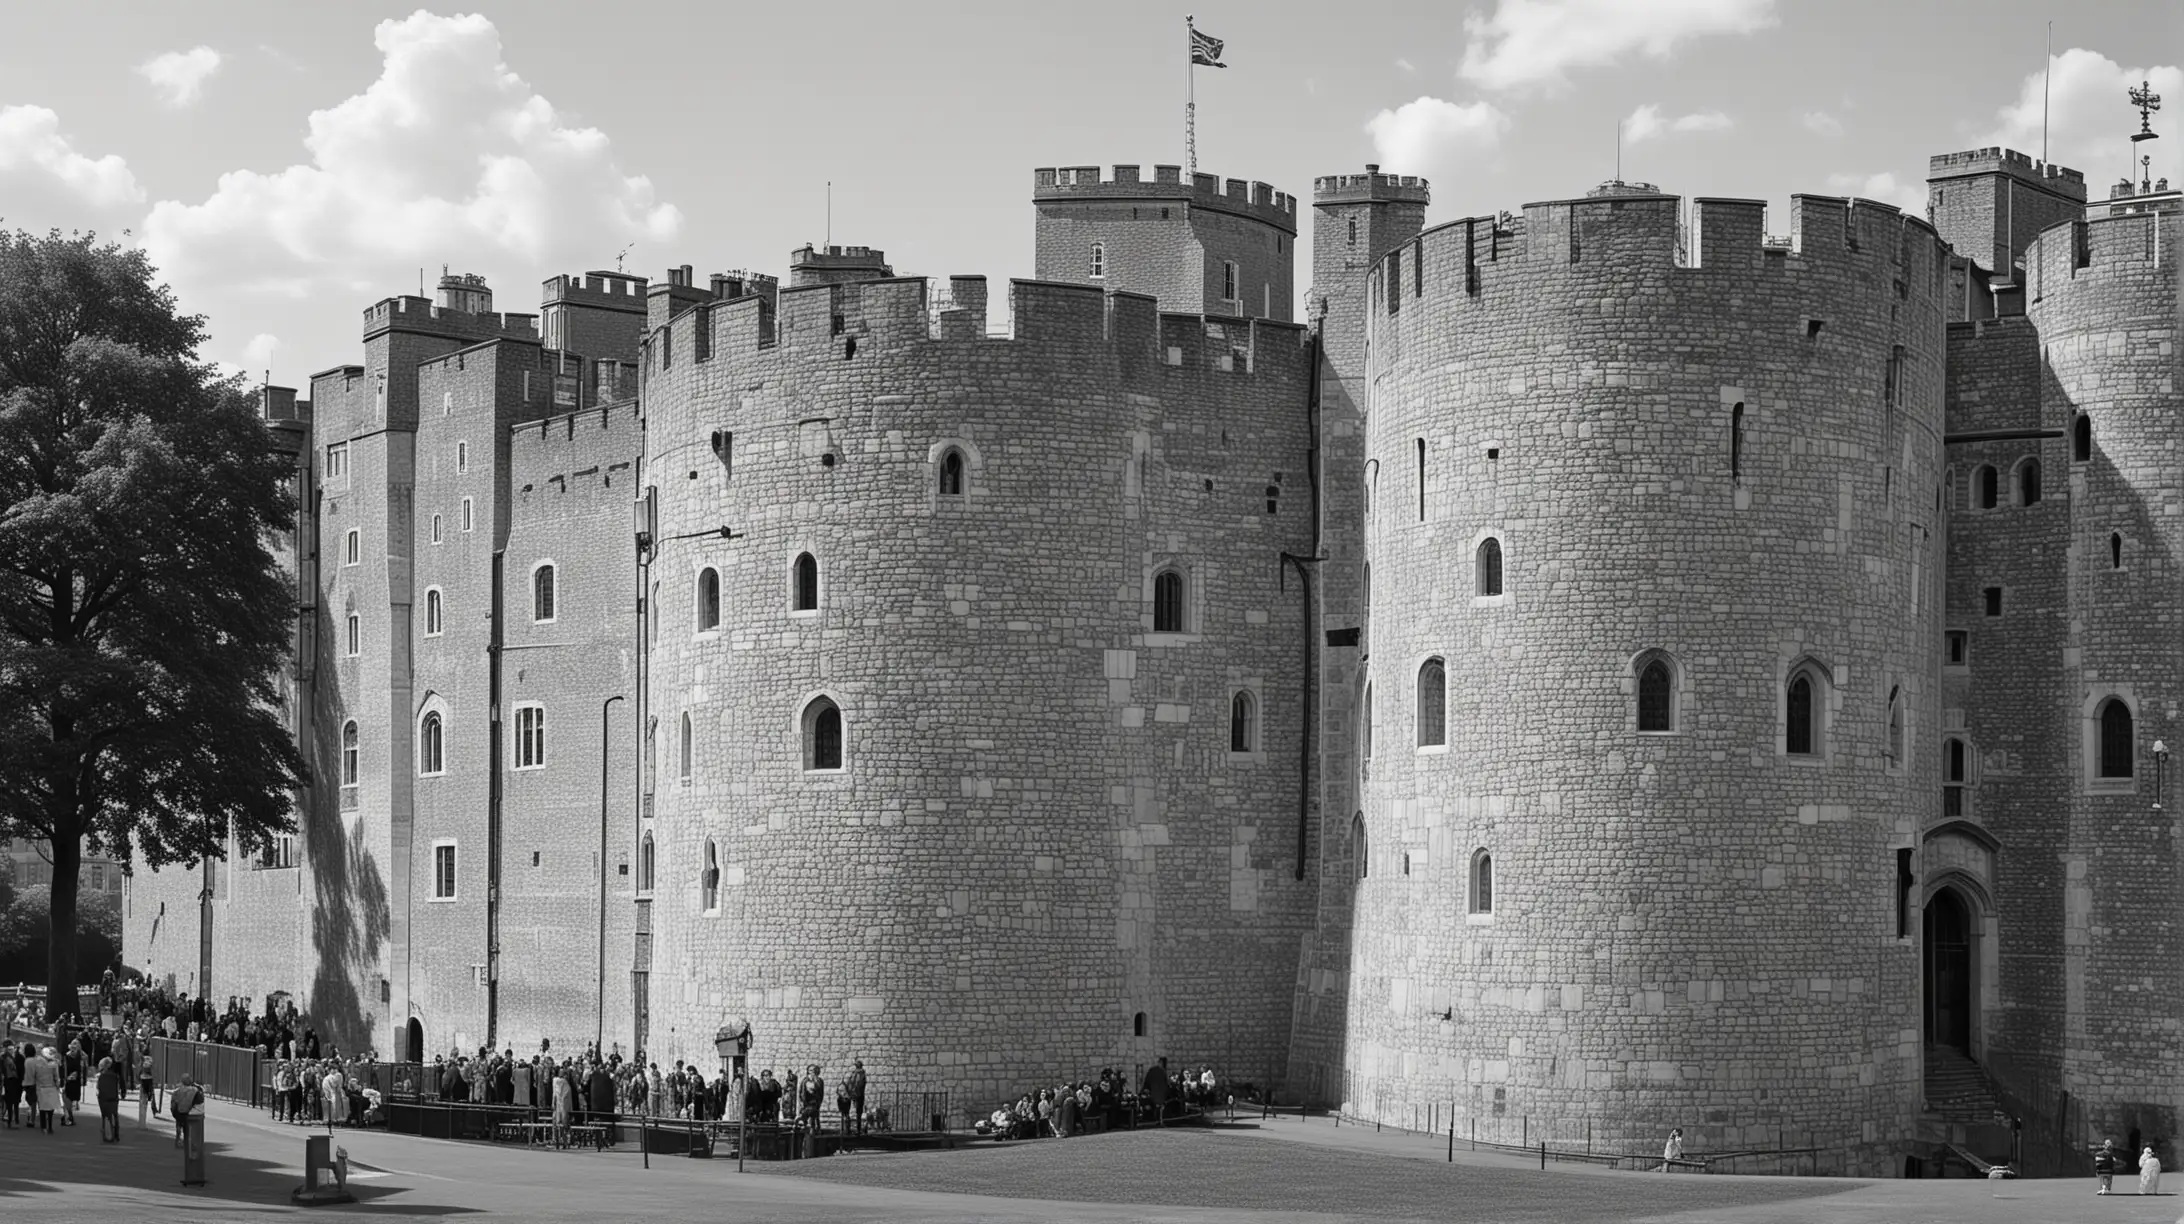 Tower of London Executions during the Reign of Henry VIII